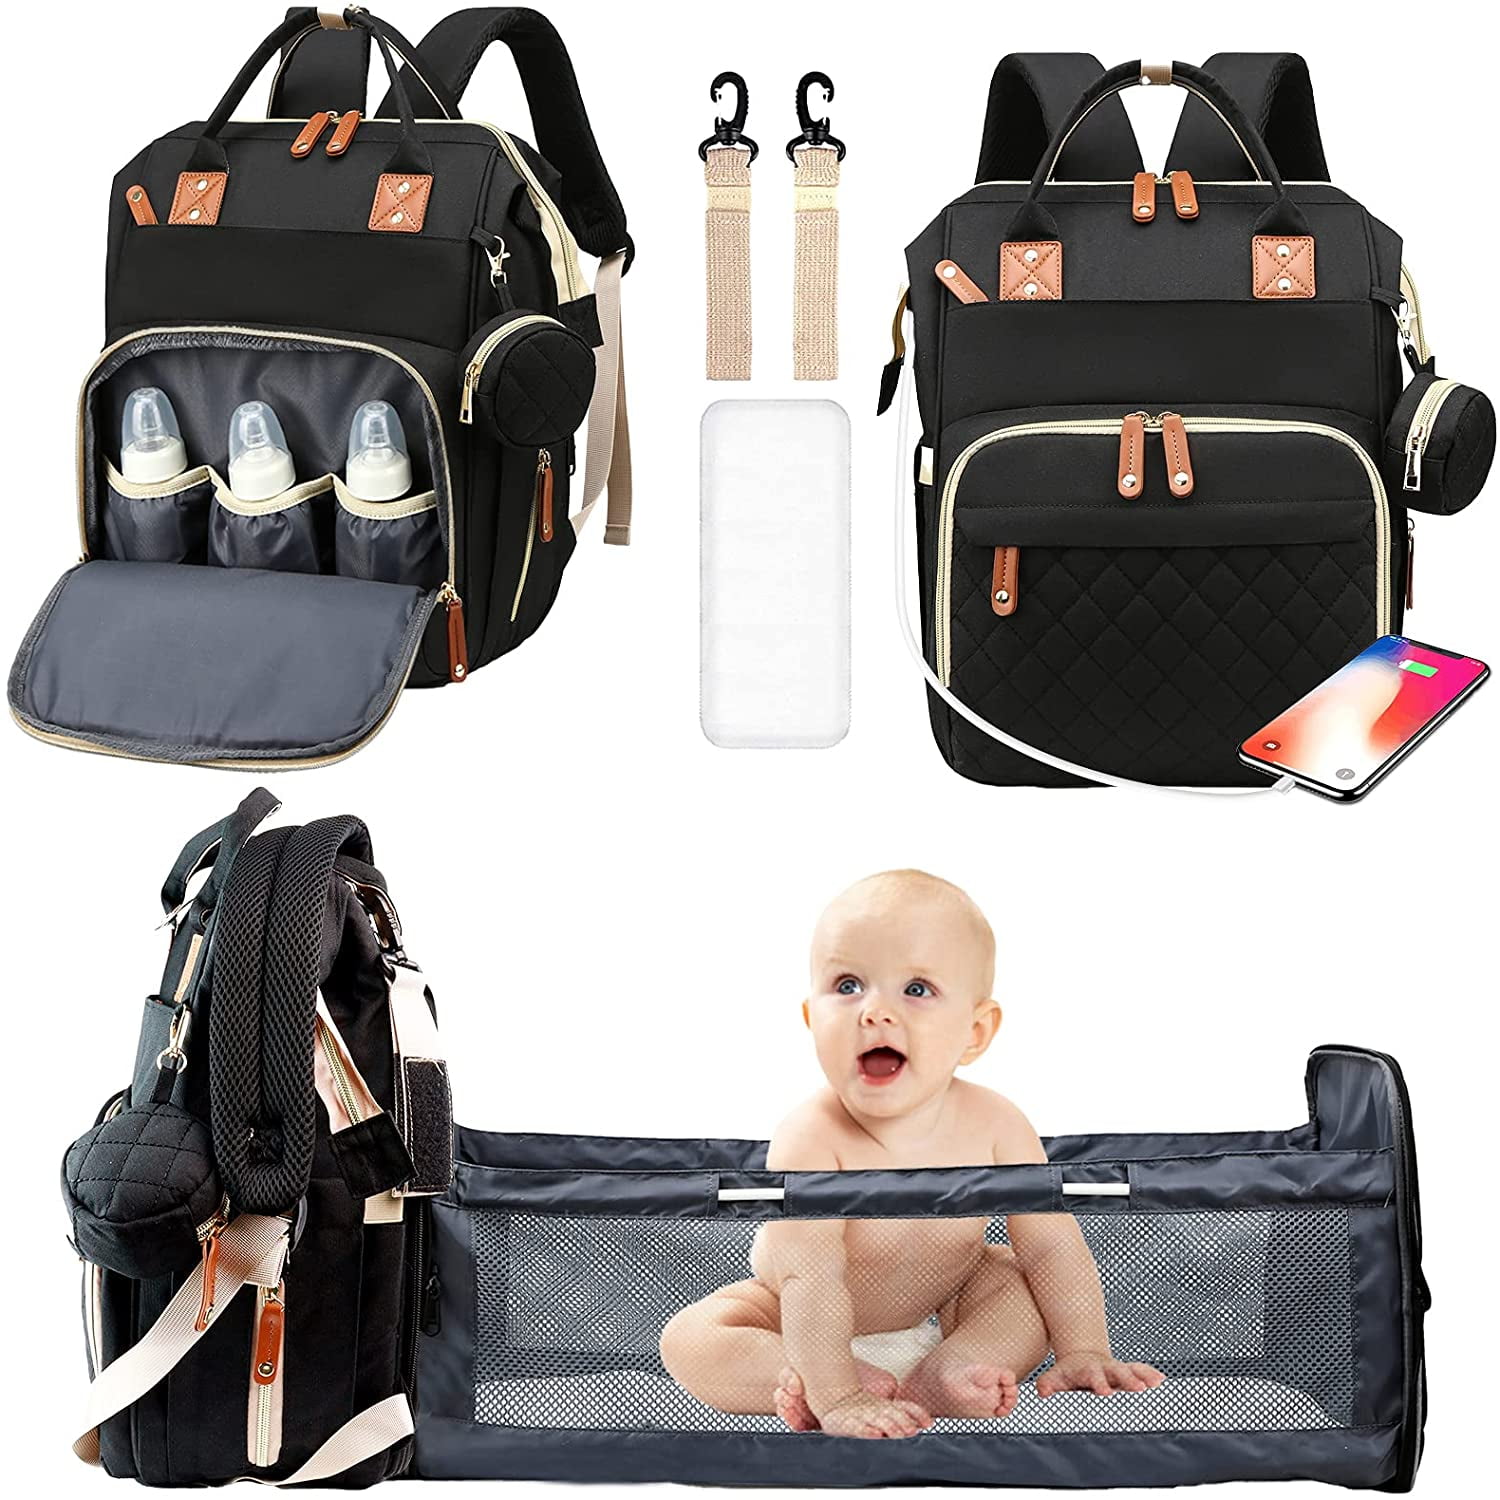 Related website baby trend expedition lx reviews: useful information